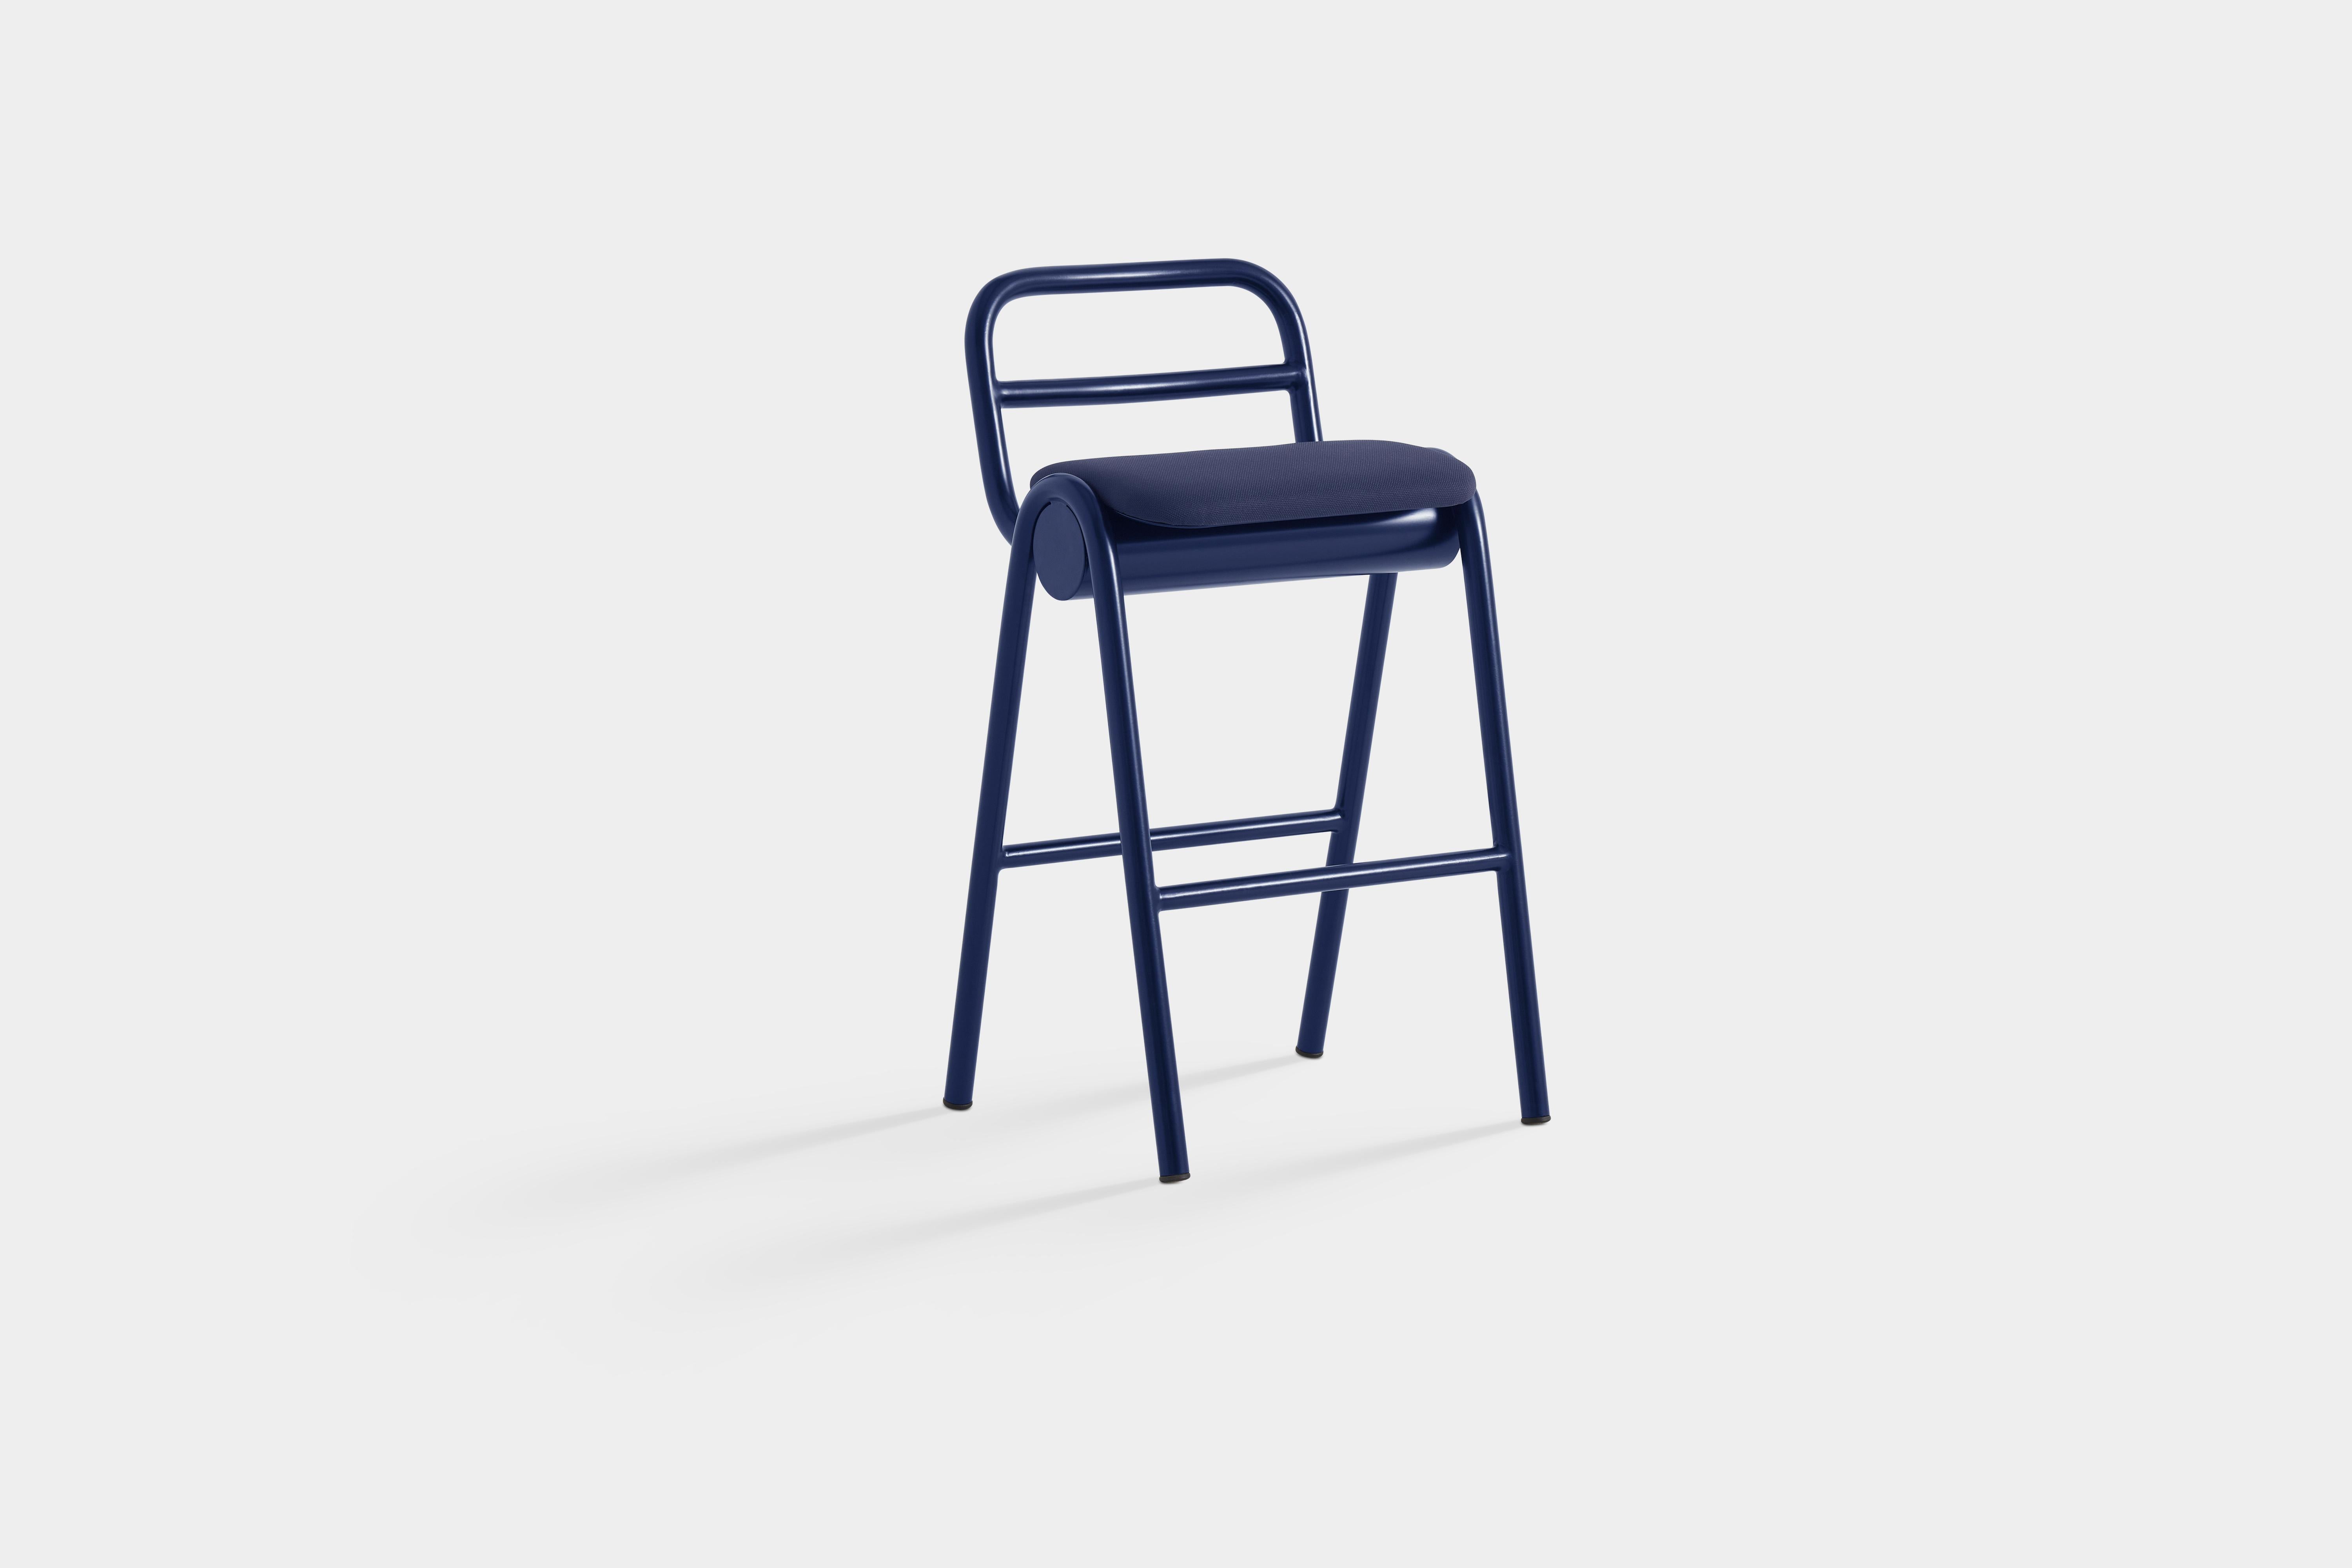 ZUM Low Bar Stool With Backrest by Pepe Albargues
Designed By Carlos Jiménez. 
Dimensions: D 49 x W 49 x D 89 cm.
Materials: Aluminum, foam, plywood and upholstery.

Curved plywood seat. Aluminum structure lacquered any RAL color. Foam CMHR (high